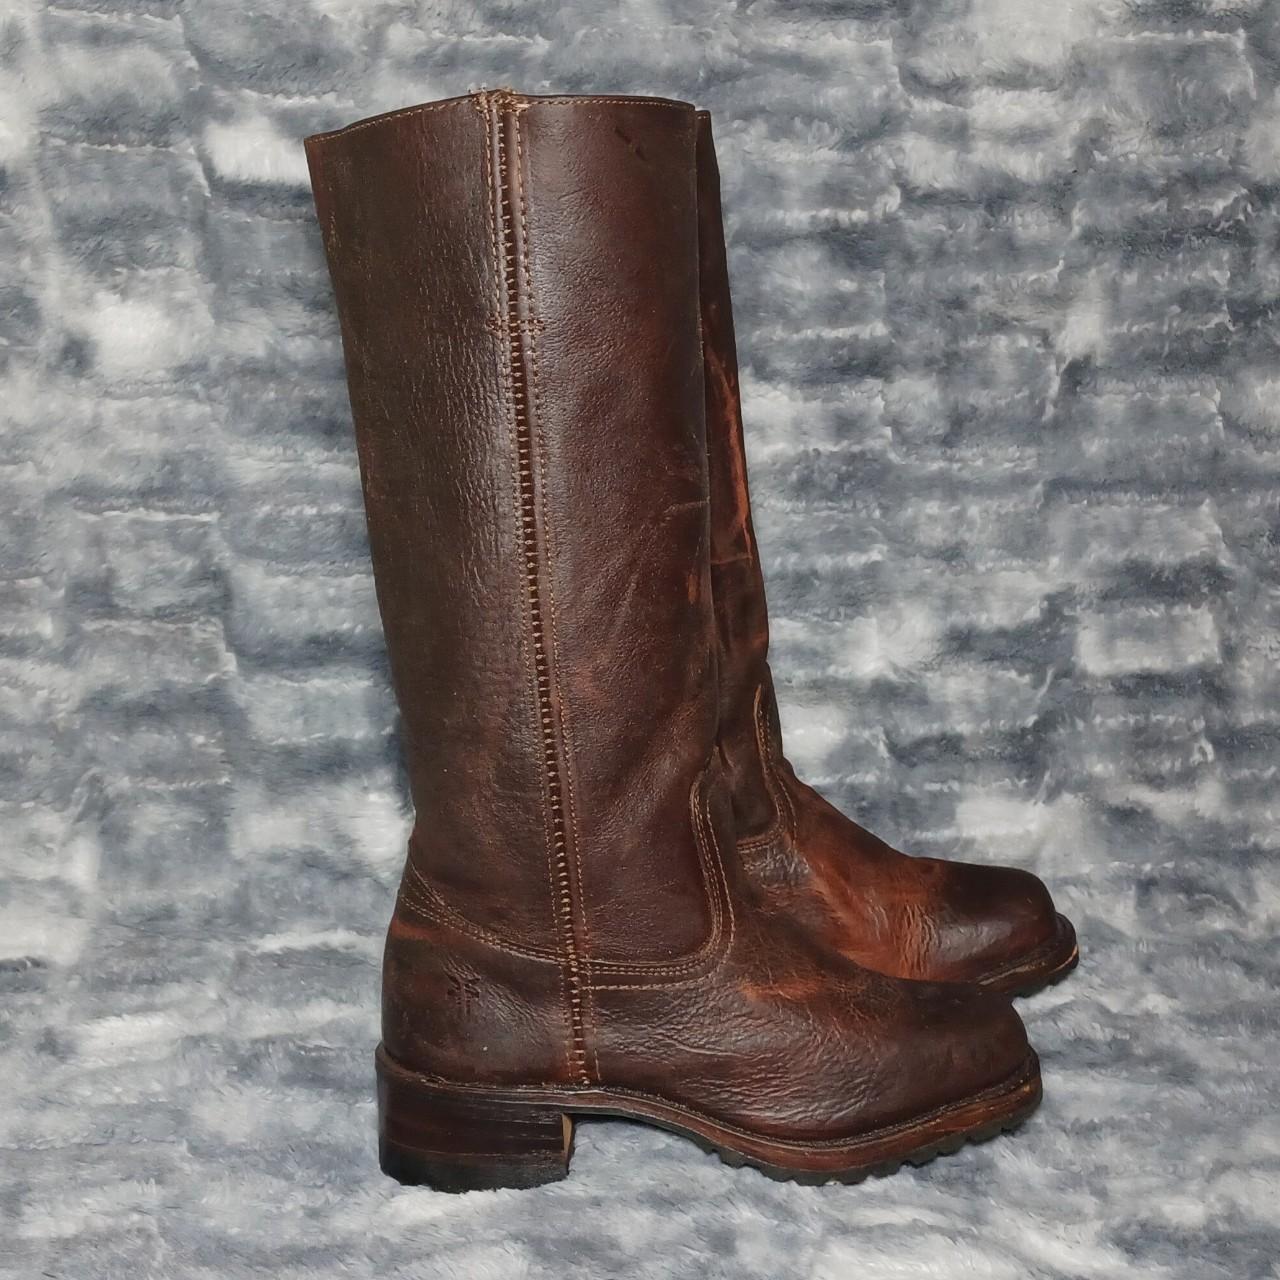 FRYE Campus Leather Motorcycle Boots Size: 5.5... - Depop